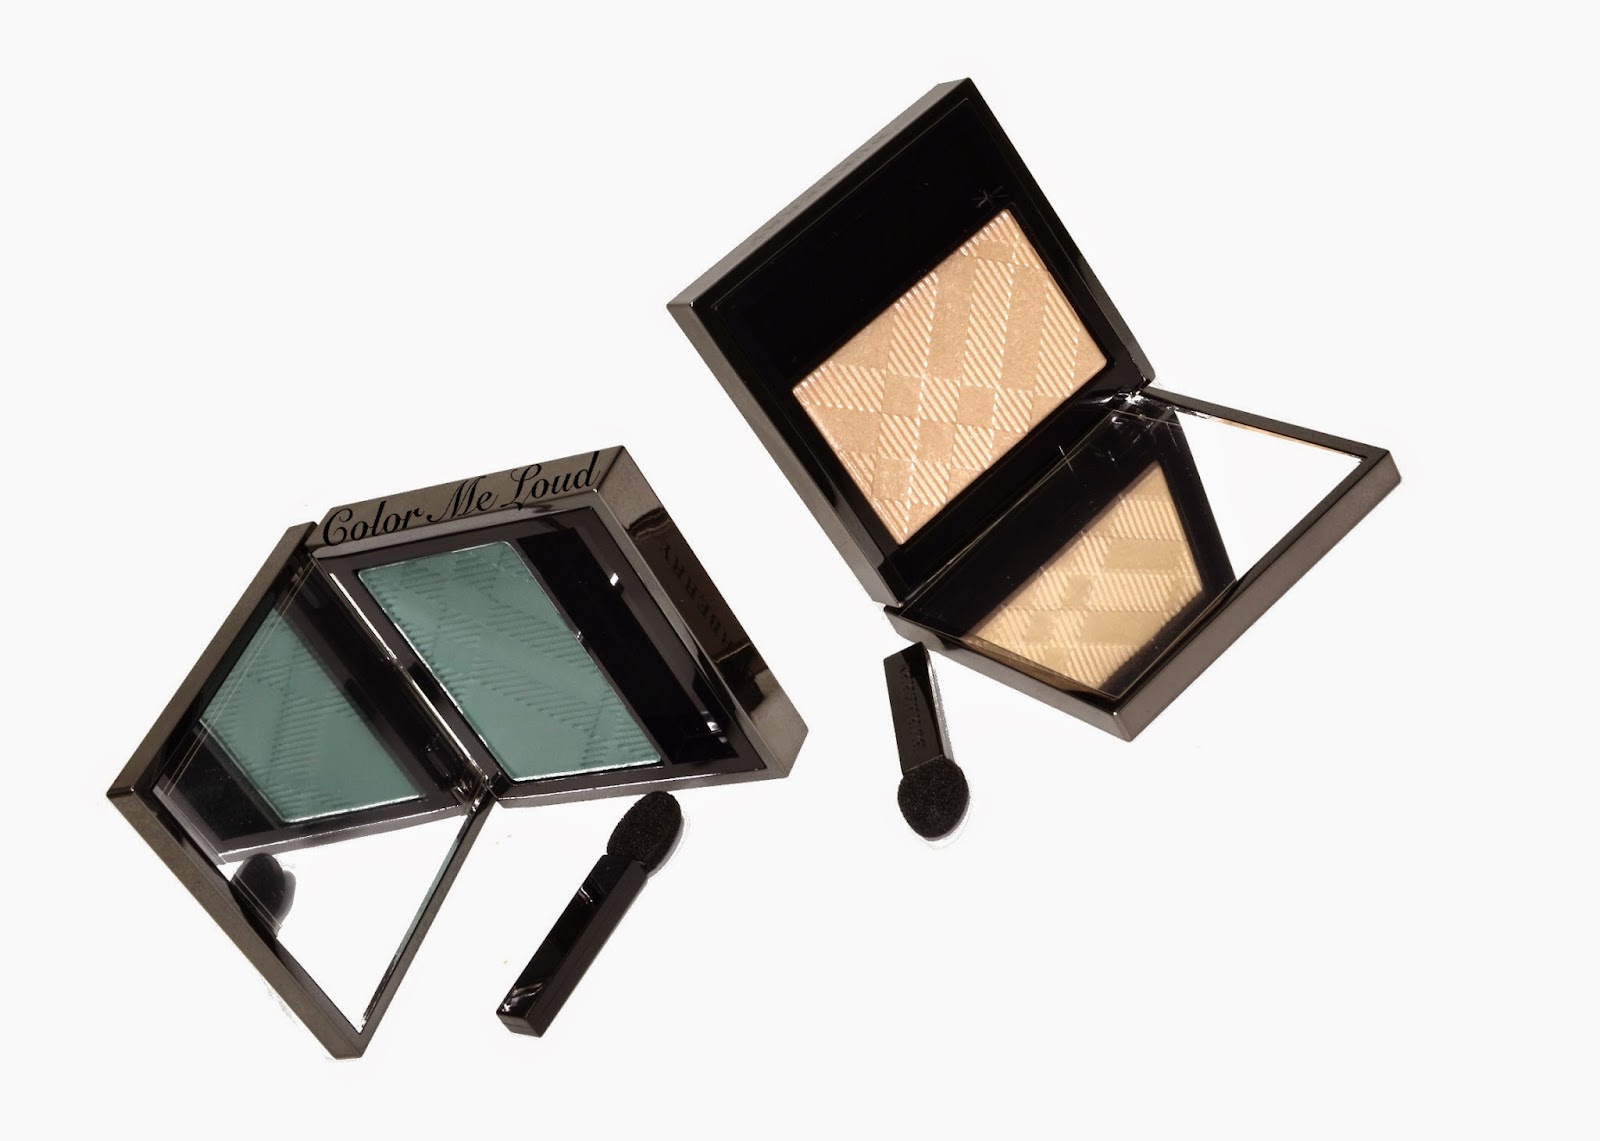 Burberry Eye Color Wet & Dry Silk #309 Aqua Green, Glow #001 Gold Pearl, Review, Swatch & FOTD